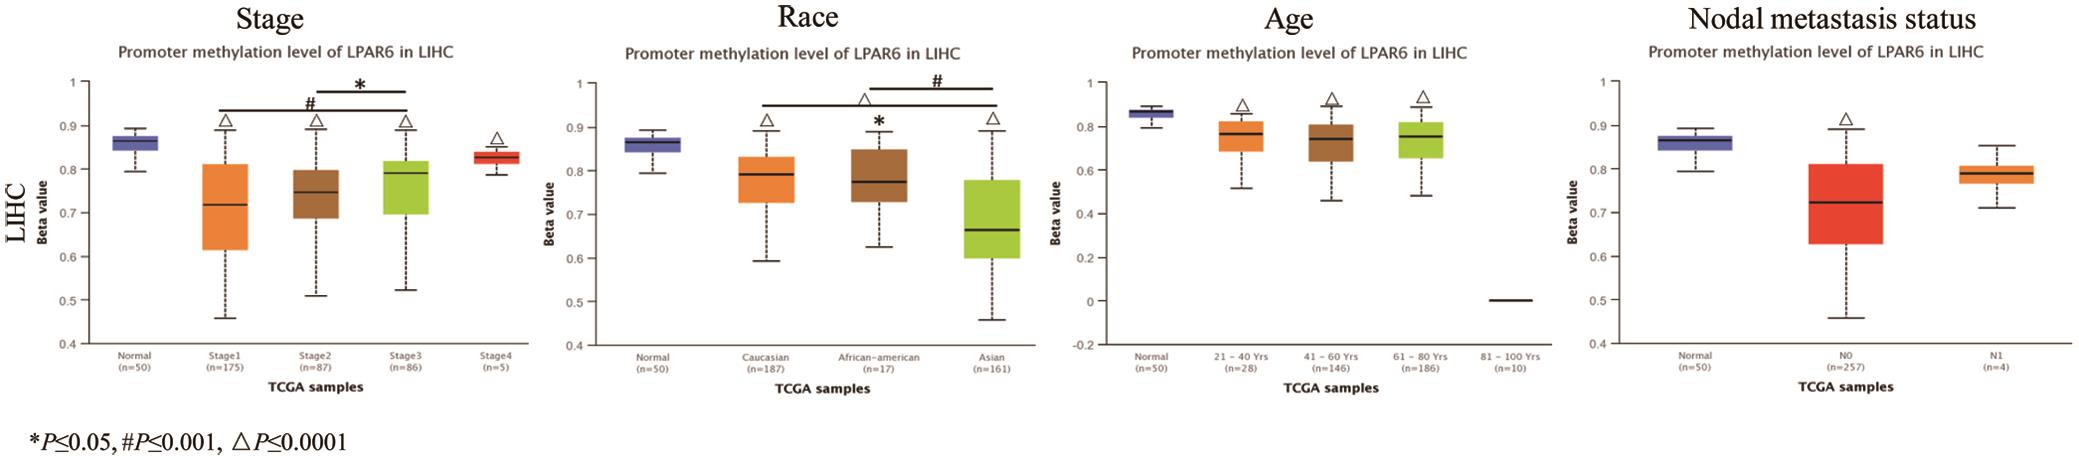 Promoter methylation levels of LPAR6 impacts the clinicopathological parameters in LIHC cohorts.